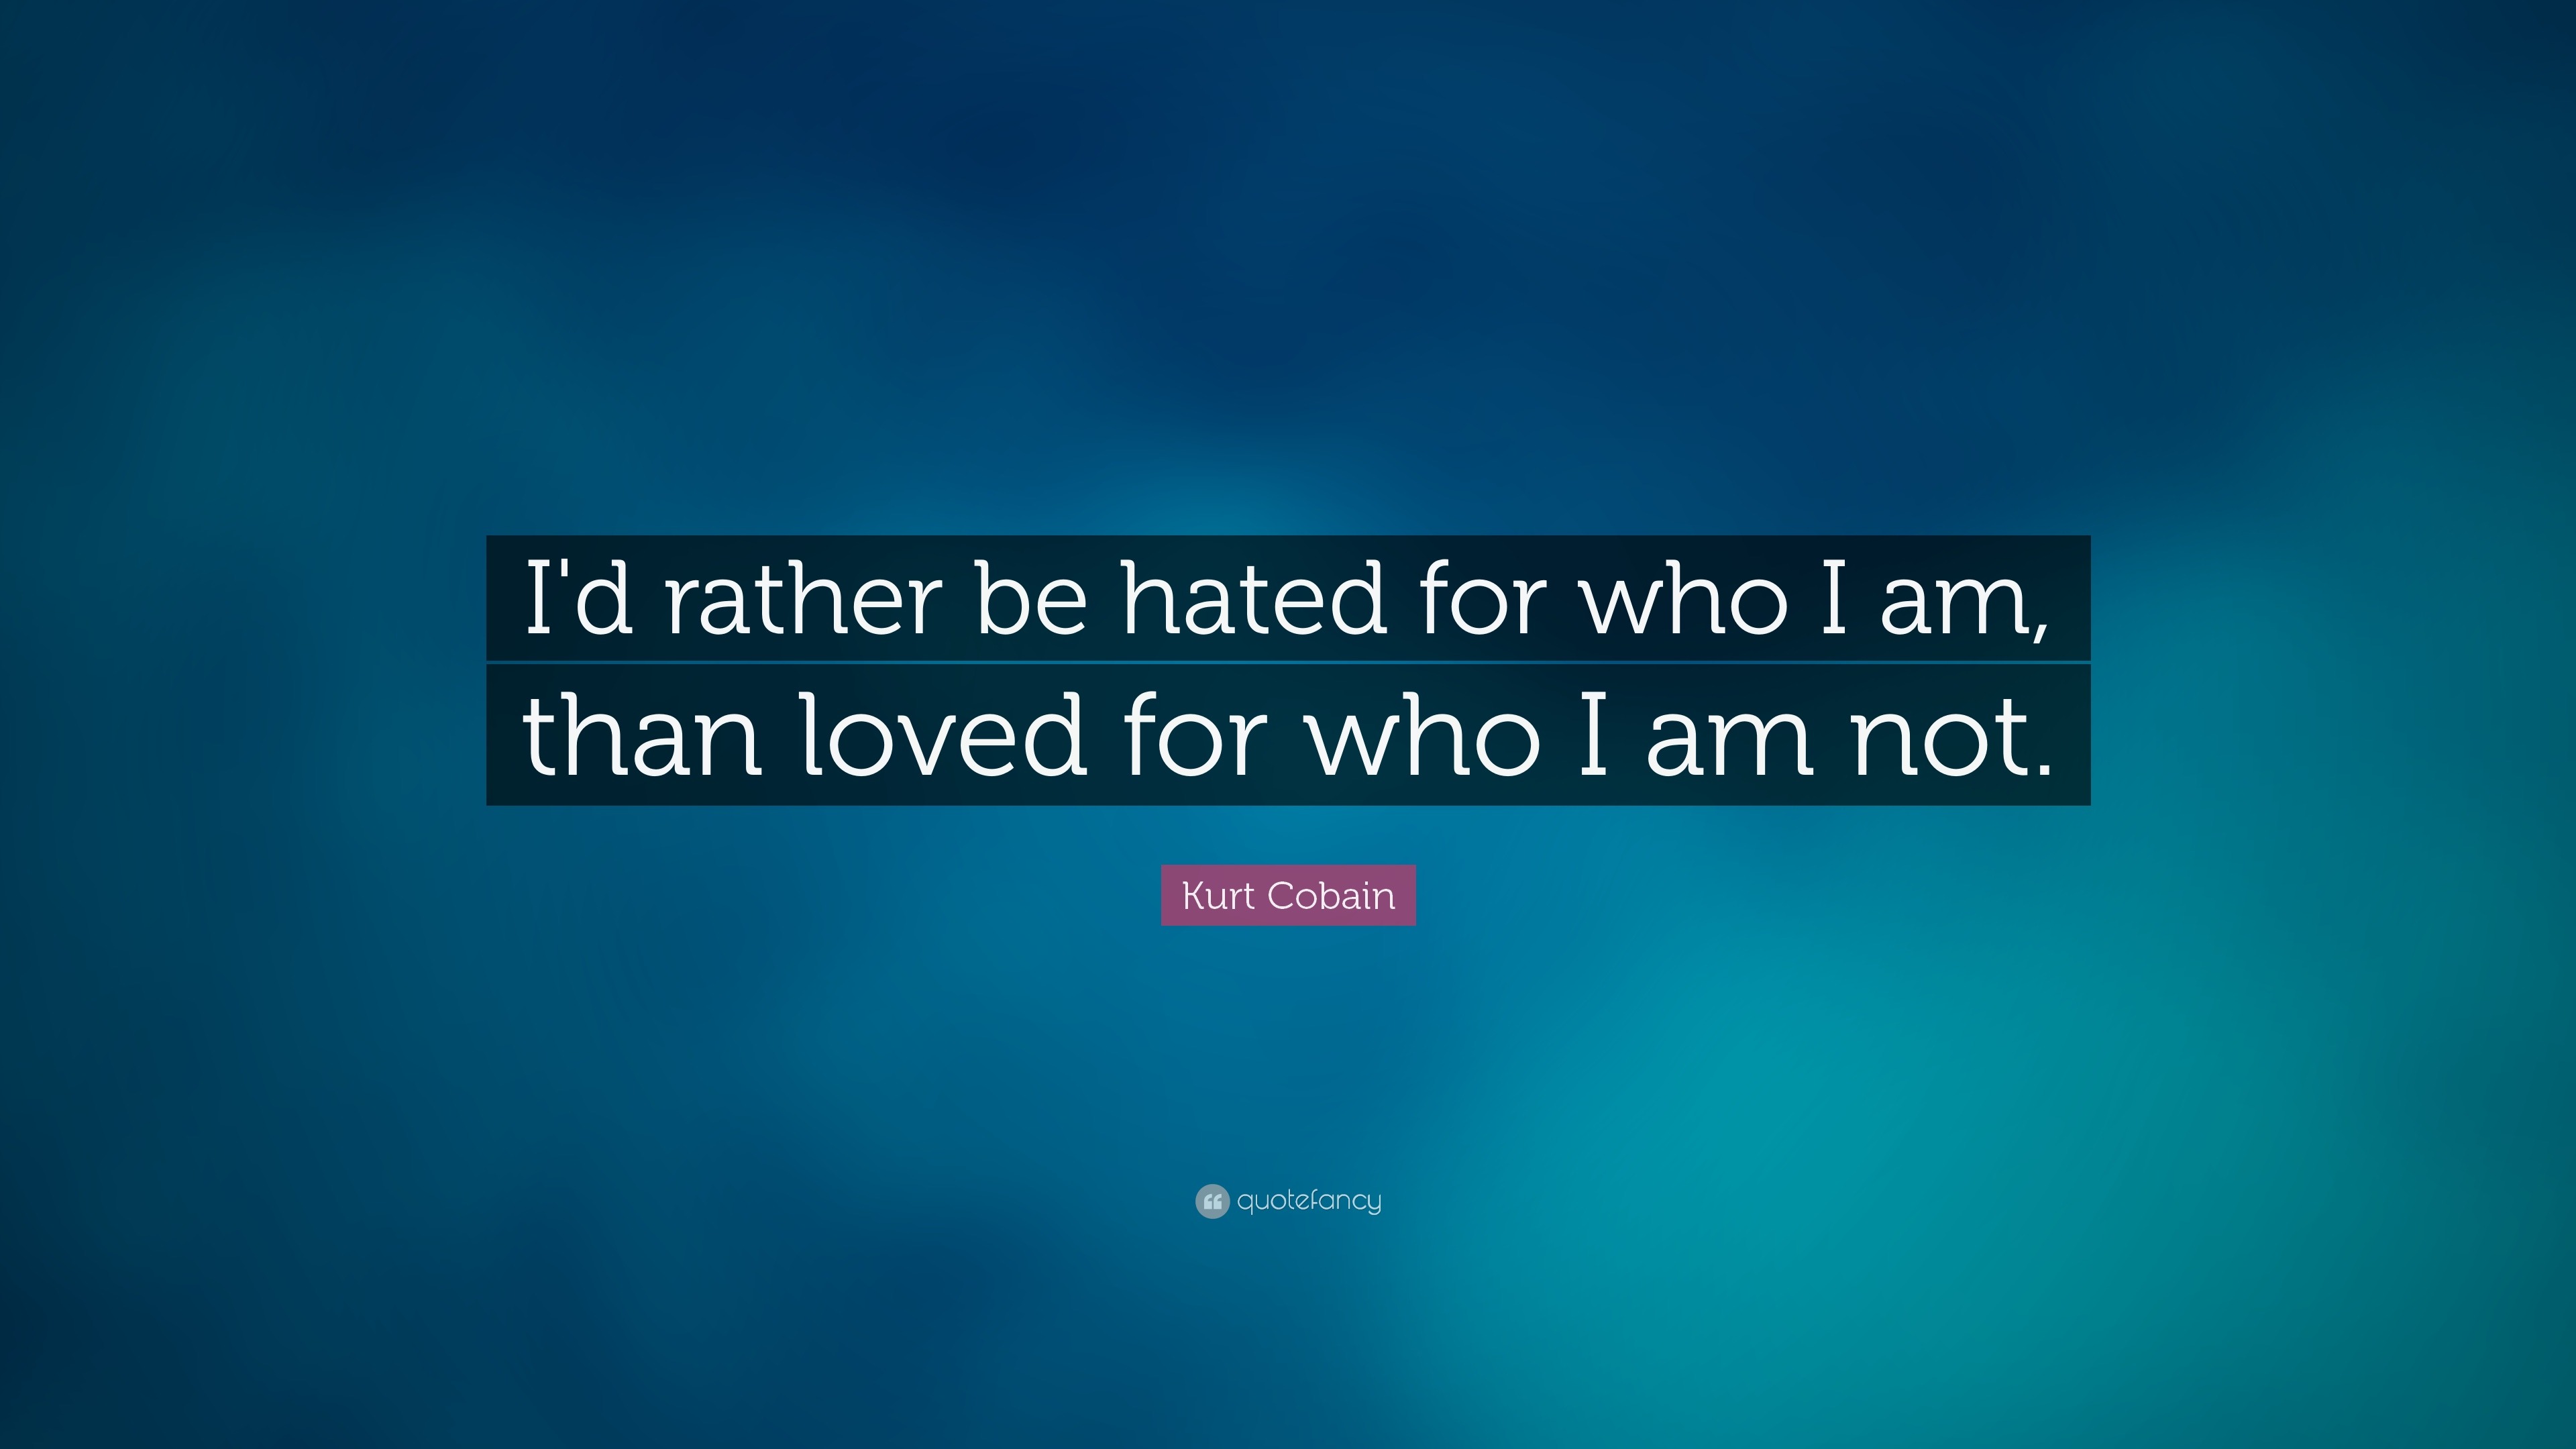 Kurt Cobain Quote: "I'd rather be hated for who I am, than loved for who I am not." (18 ...